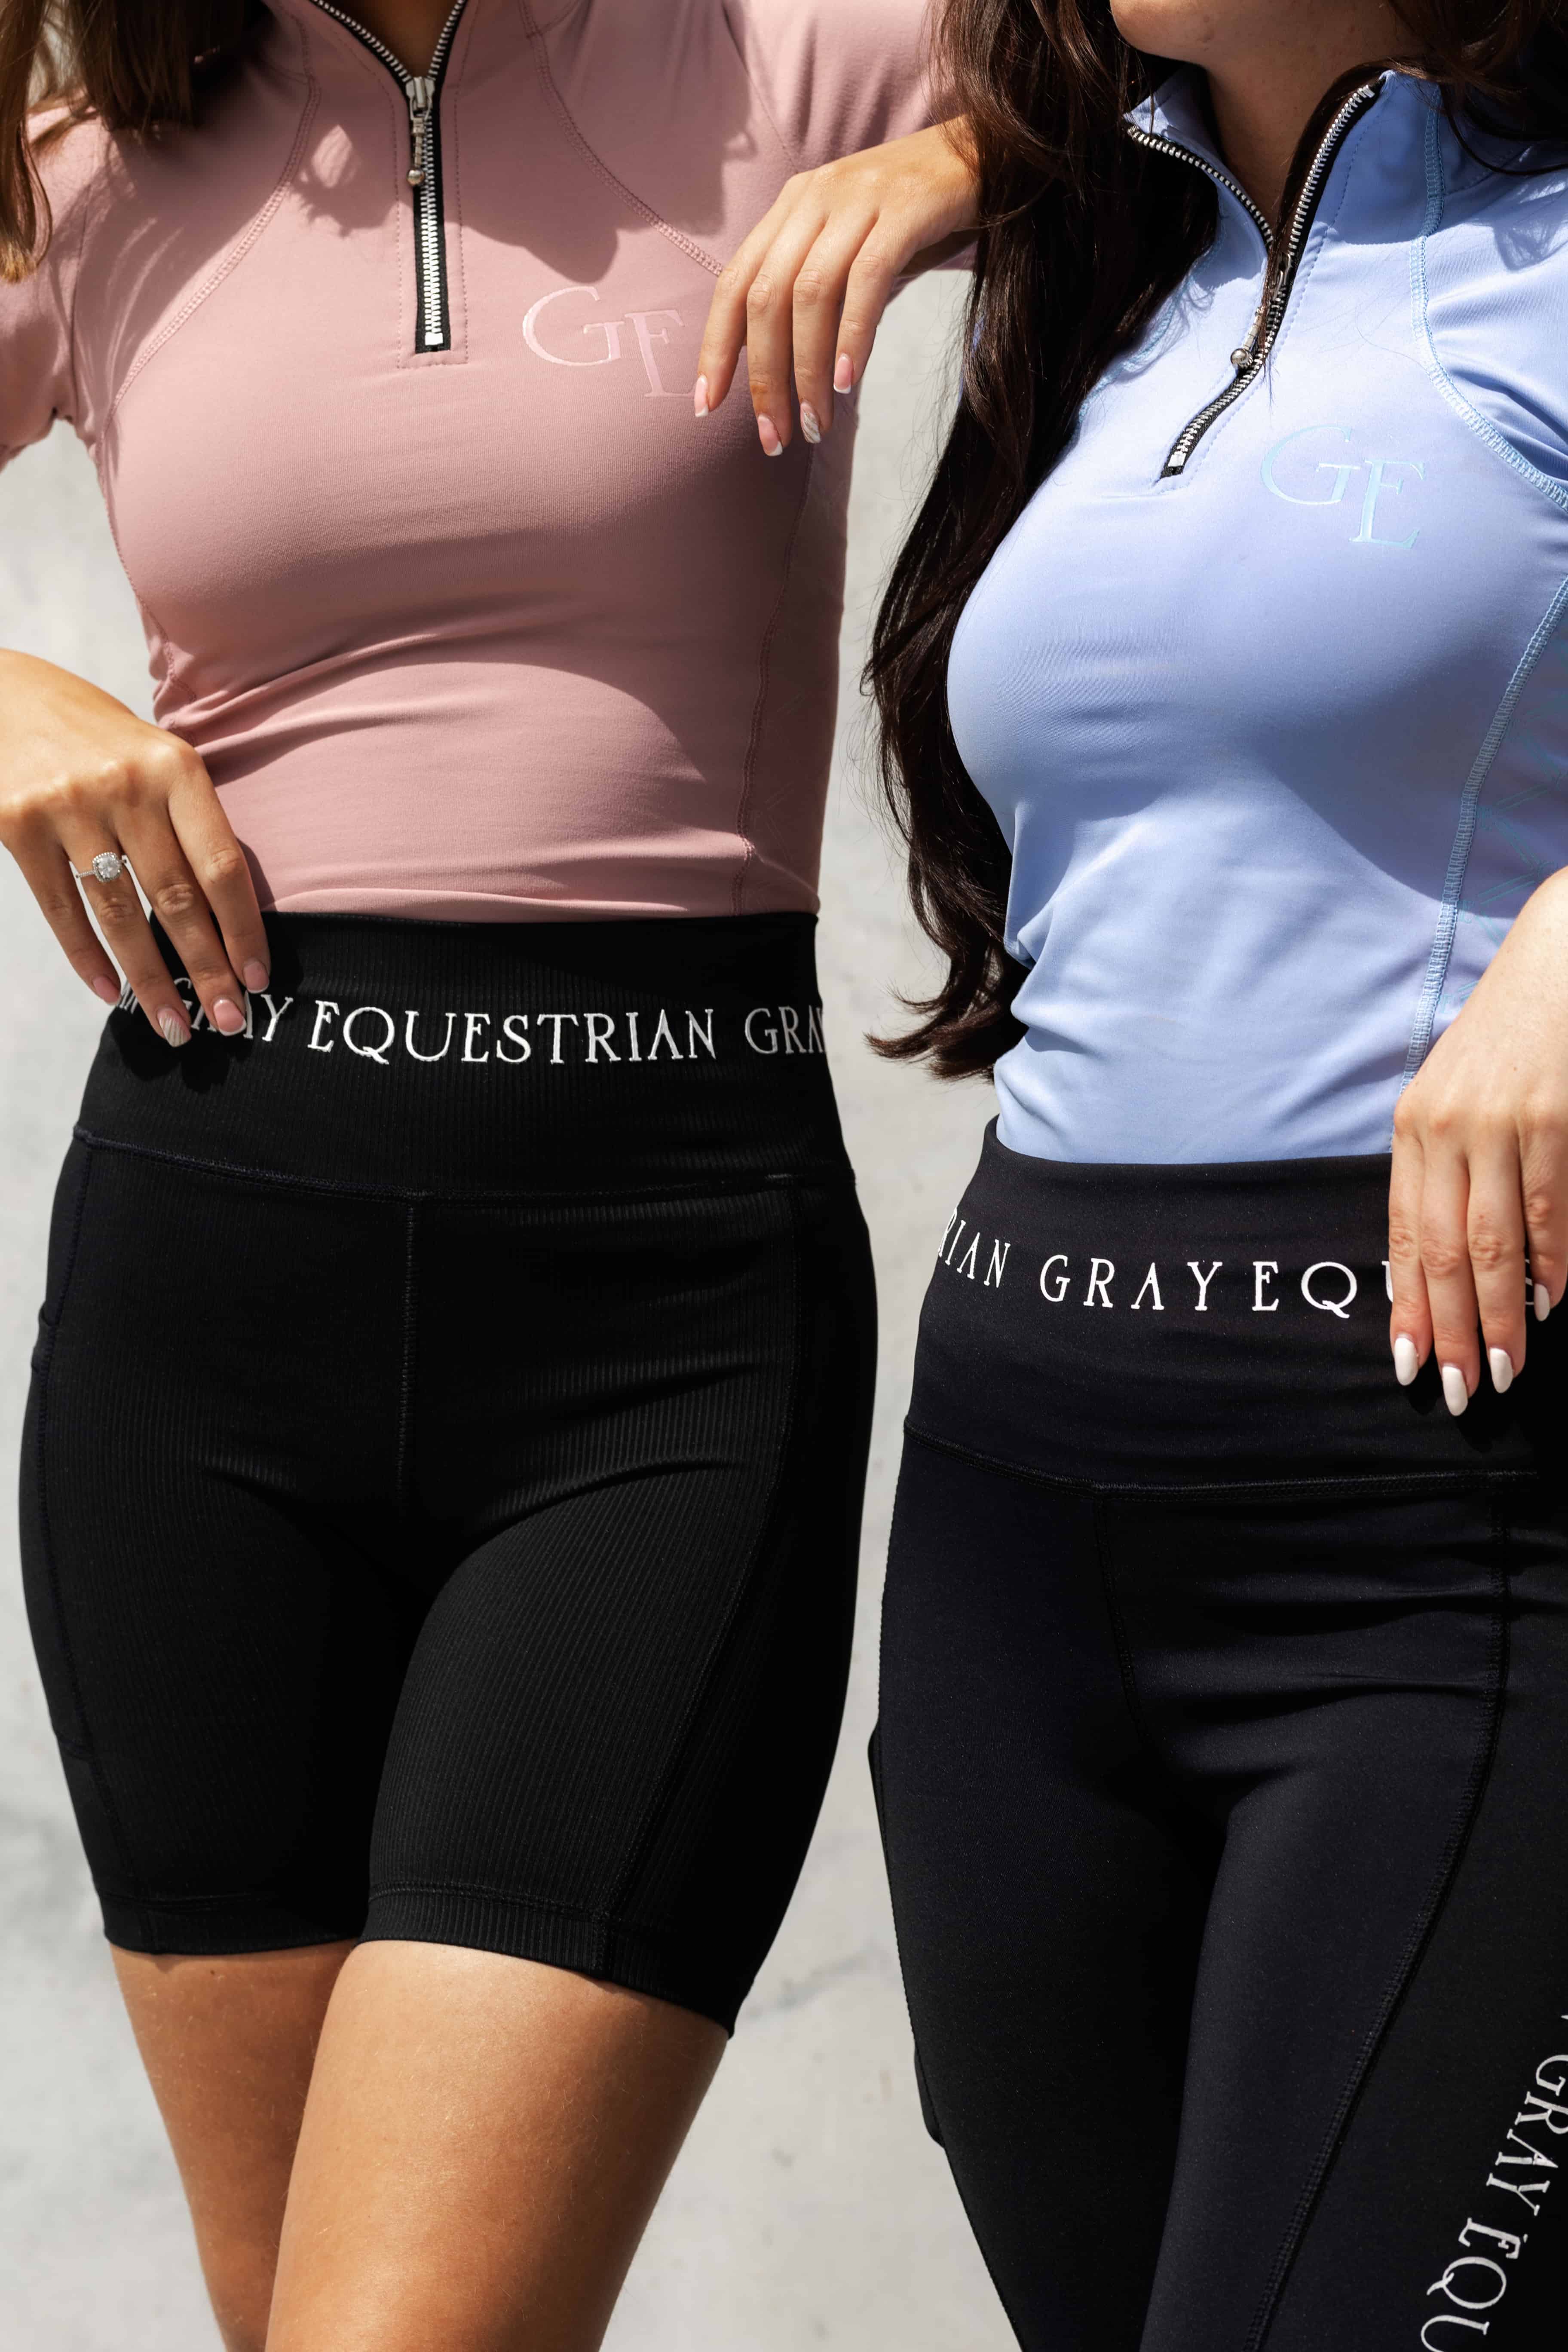 Two models sitting site by side. The model on the right is wearing our light blue base layer and black leggings. The model on the left is wearing our pink base layer and black riding shorts.